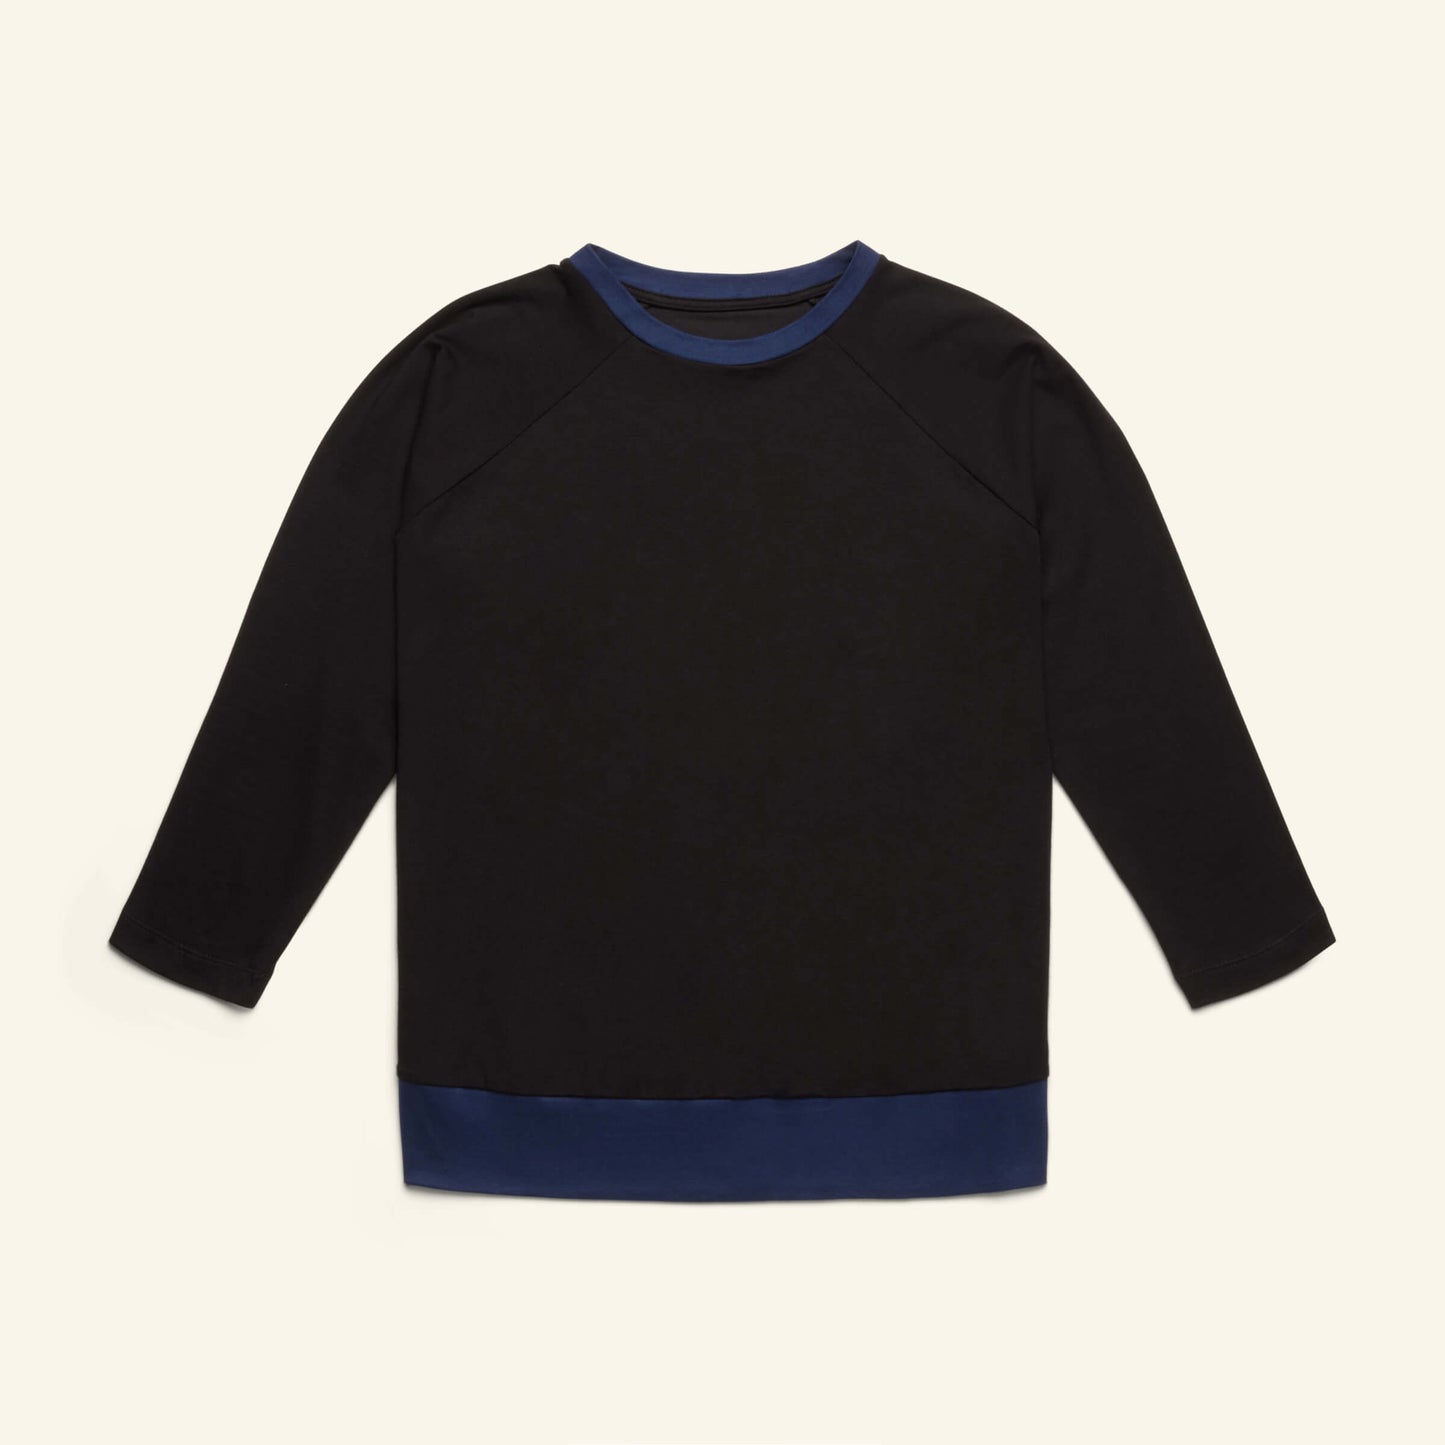 The Slumber Cloud Essential Raglan Long Sleeve made with Outlast temperature regulation technology